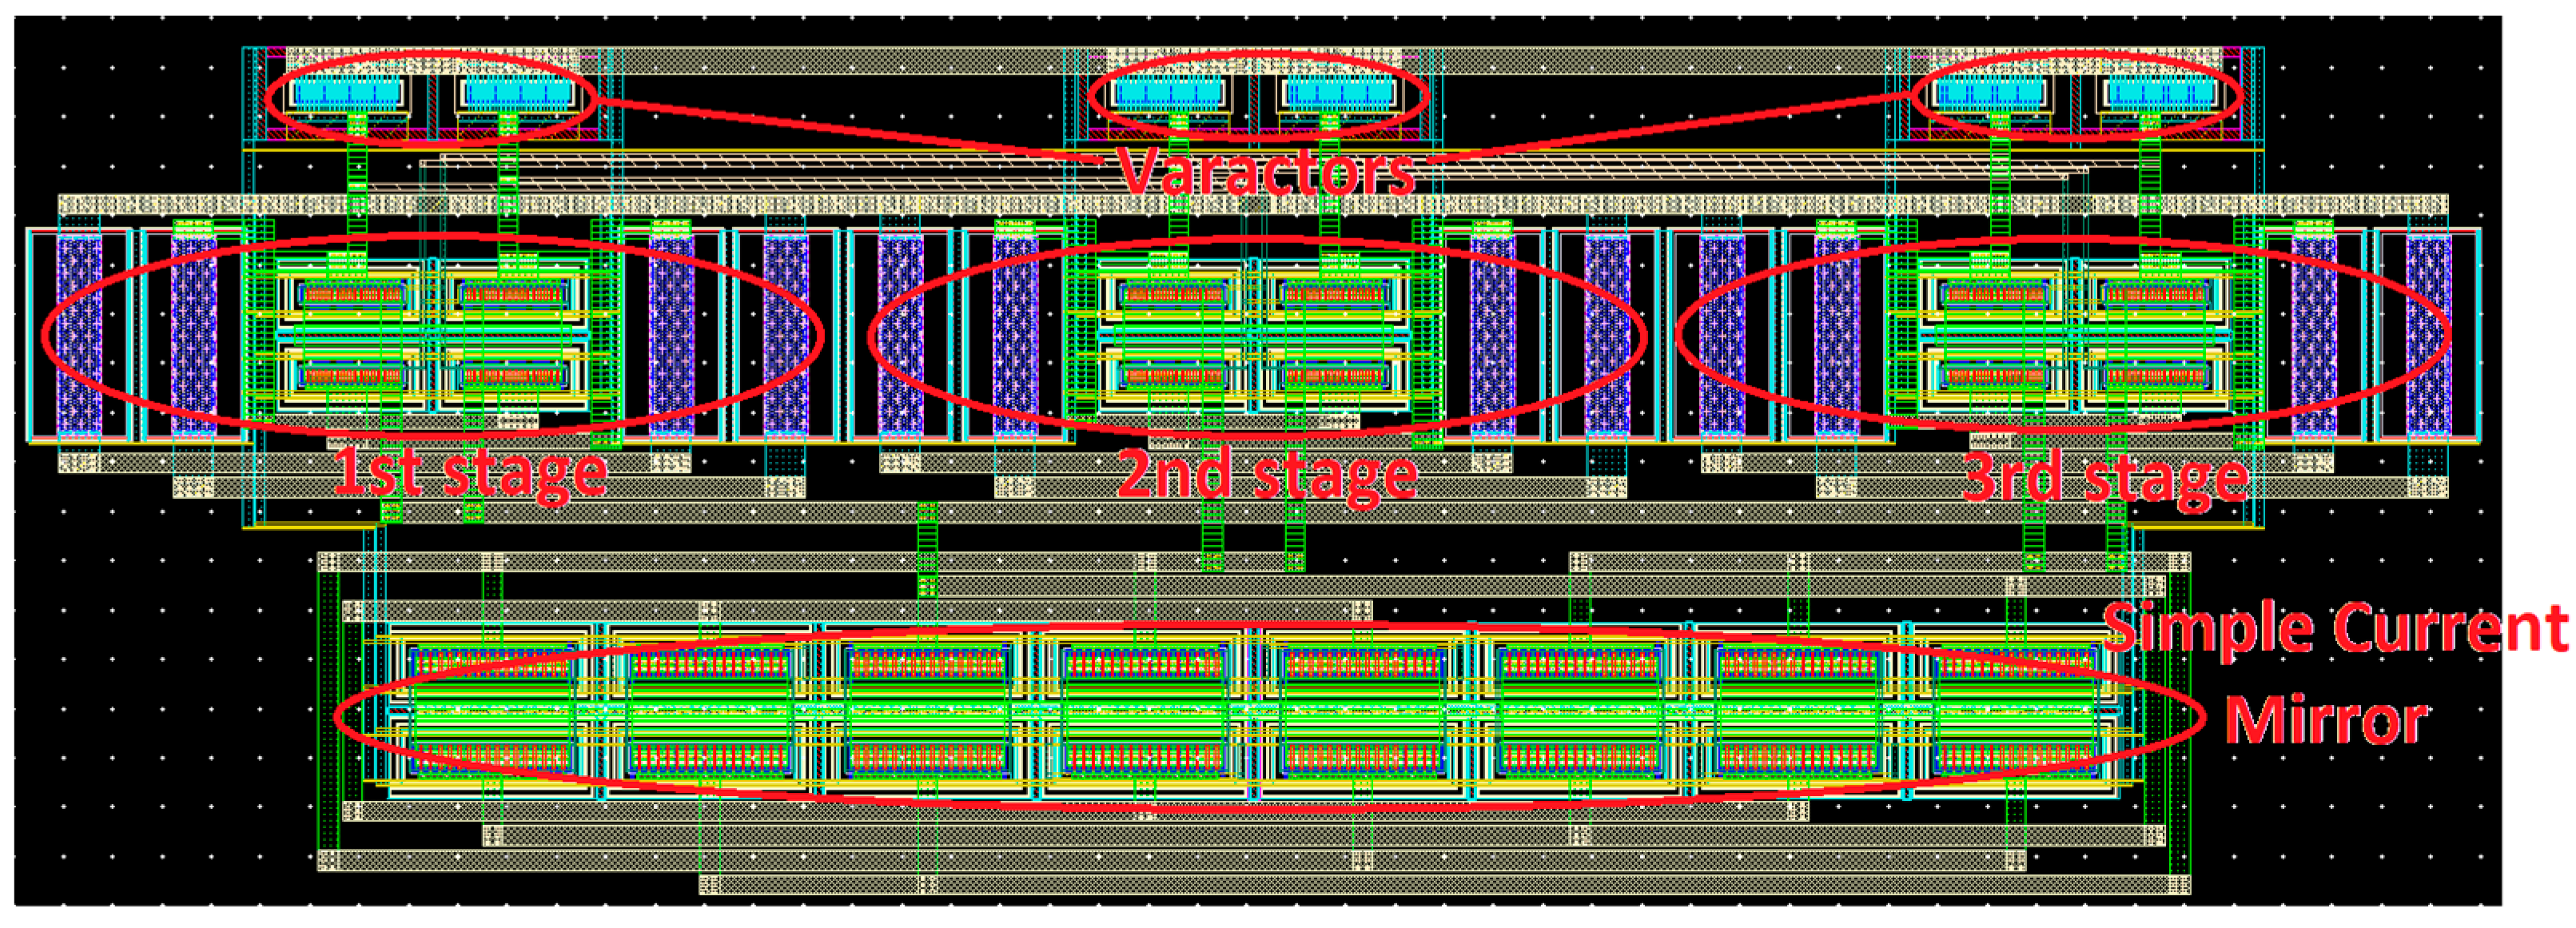 VCO phase noise modeling using a transient noise simulation - Custom IC  Design - Cadence Technology Forums - Cadence Community